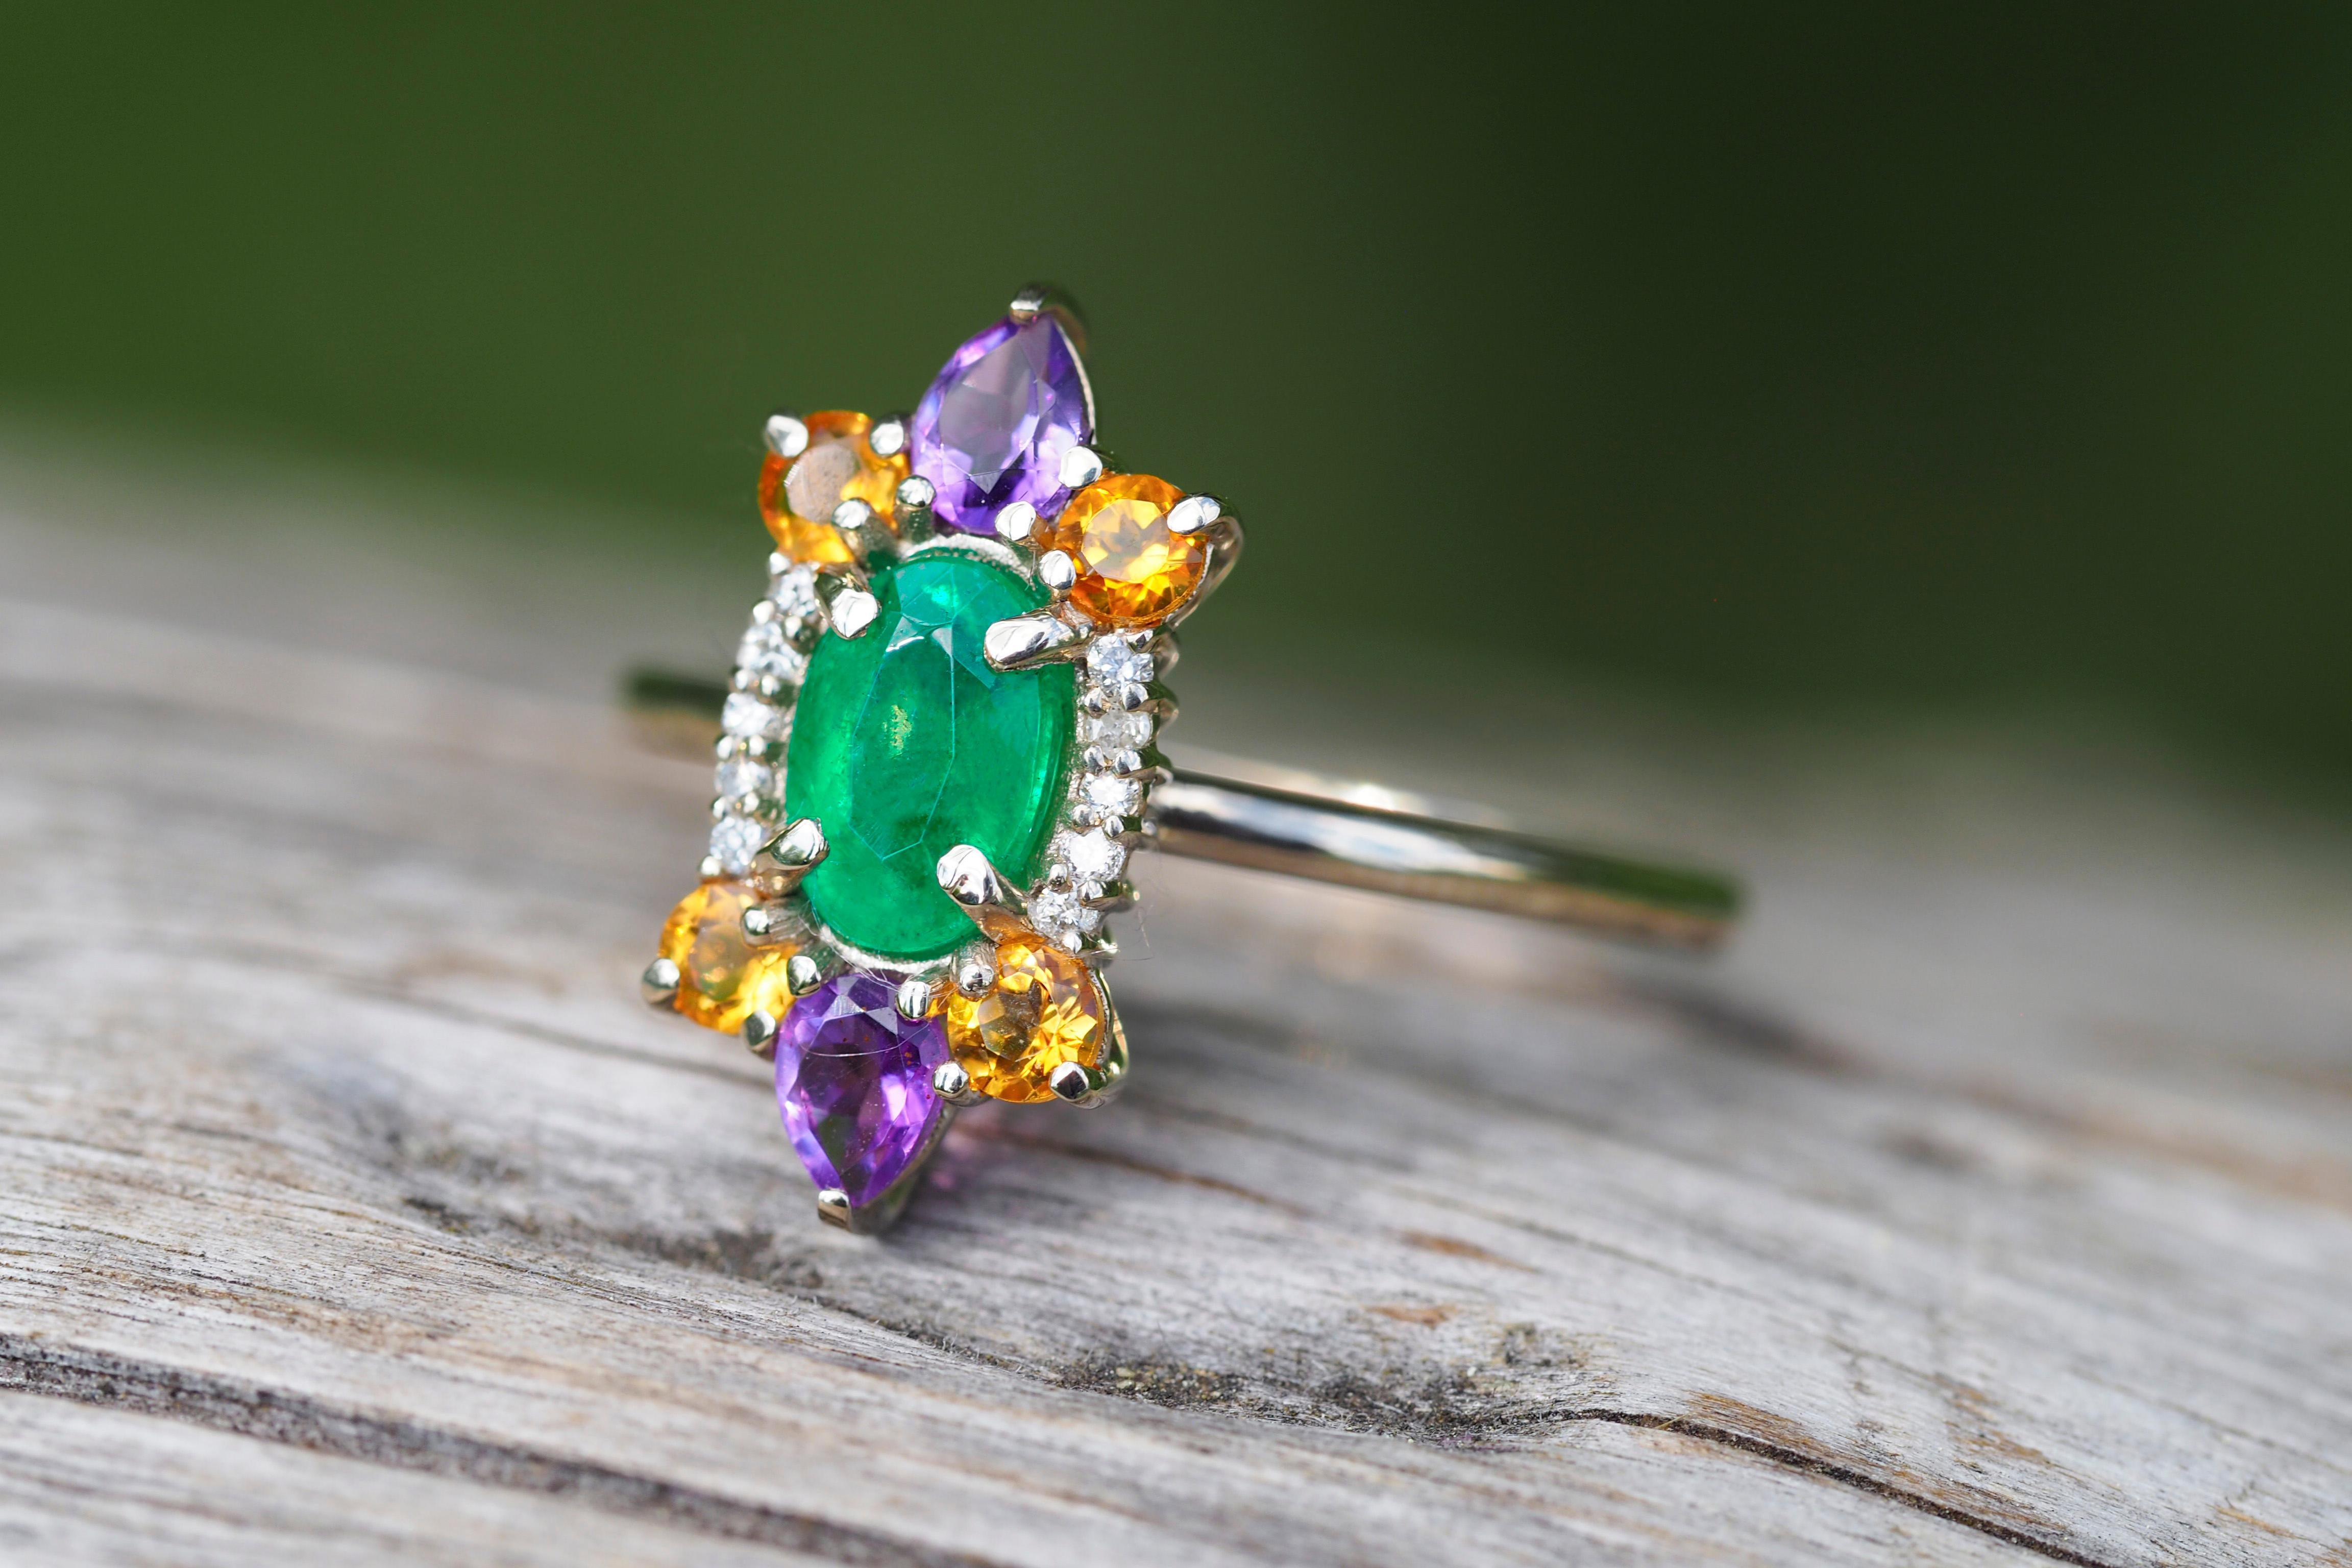 For Sale:  14 K Gold Ring with Oval Emerald, Sapphires, Amethysts and Diamonds! 9